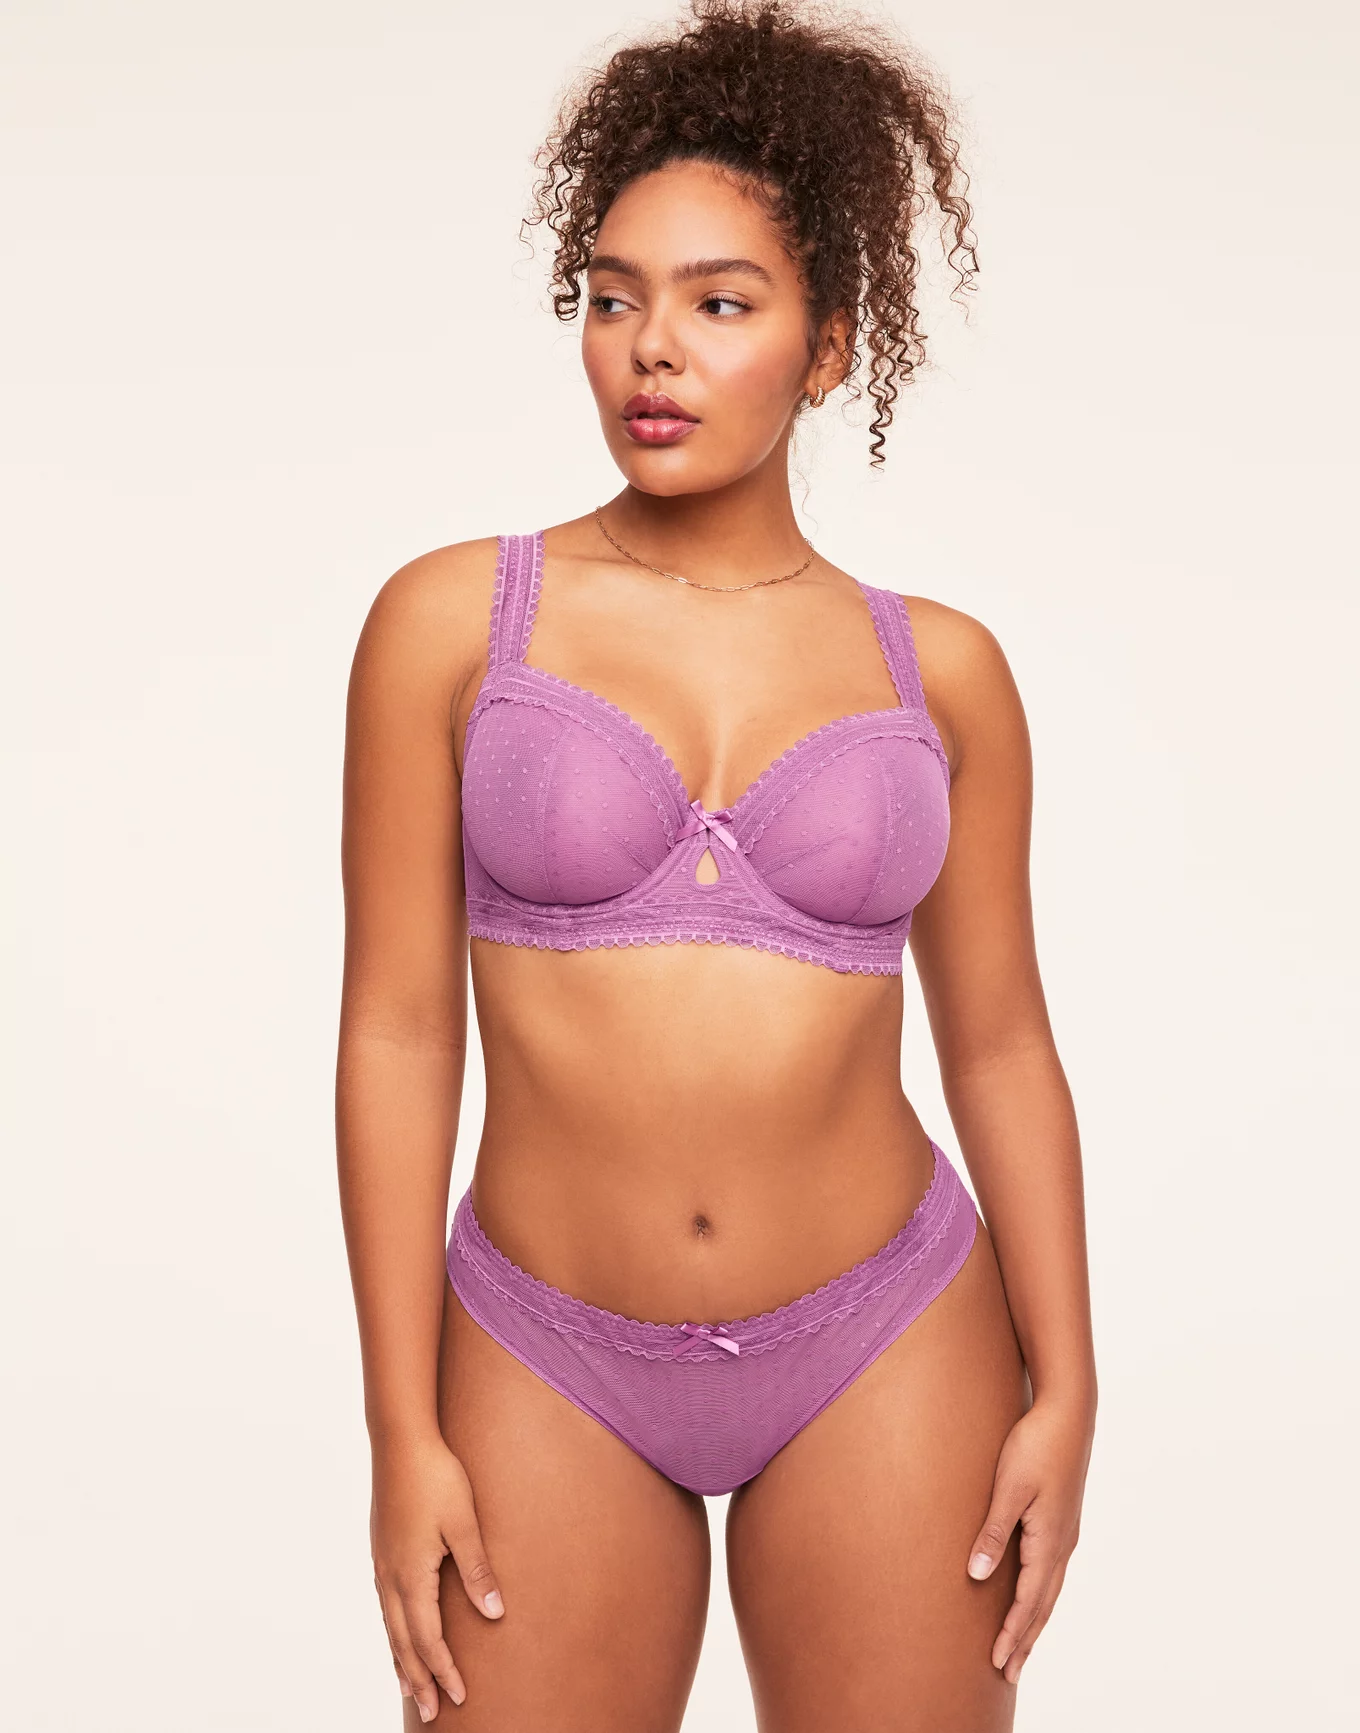 Plus Size - Unlined Balconette Bra - Dotted Lace Purple with